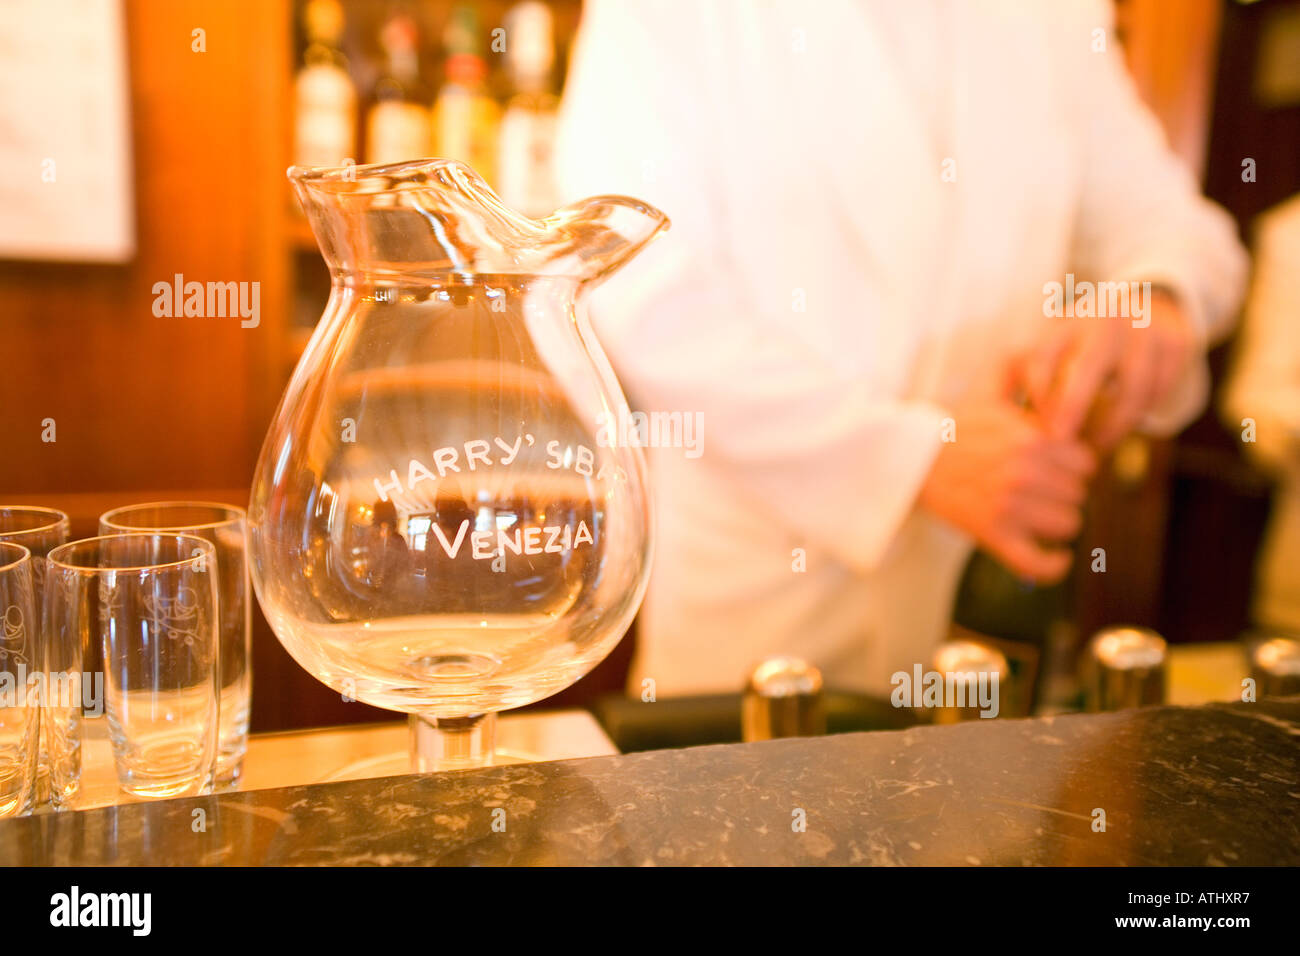 Harry's Bar in Venice Italy where the Bellini aperitif was invented Stock  Photo - Alamy